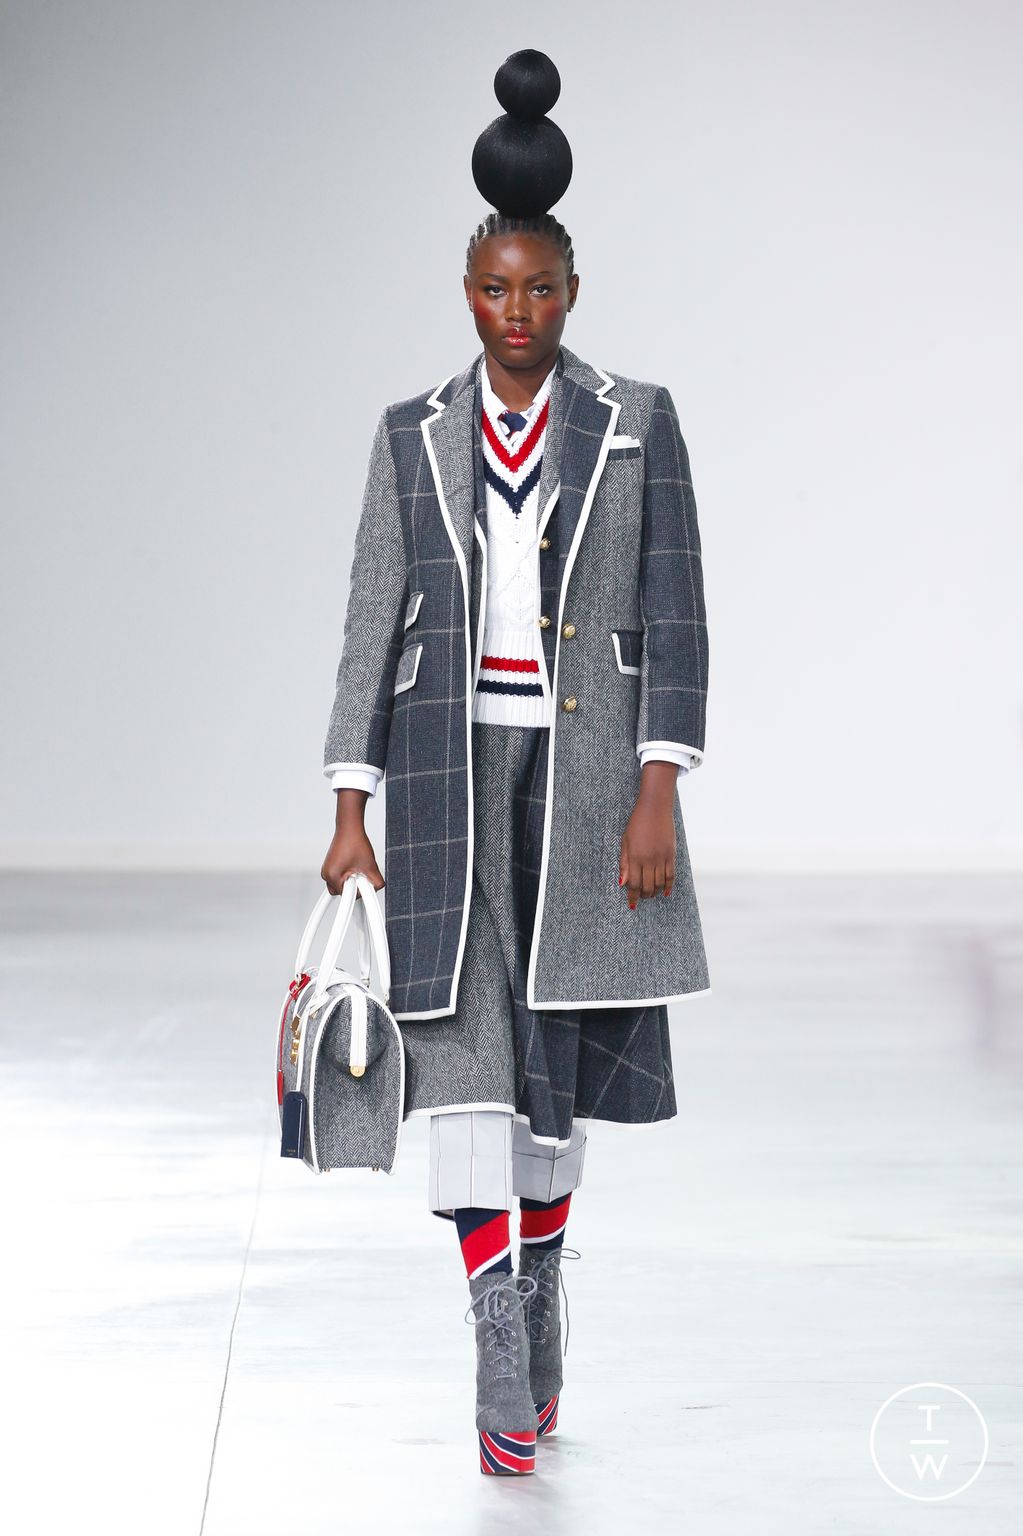 Runway Report: Fashion News From Celine, Louis Vuitton and Thom Browne